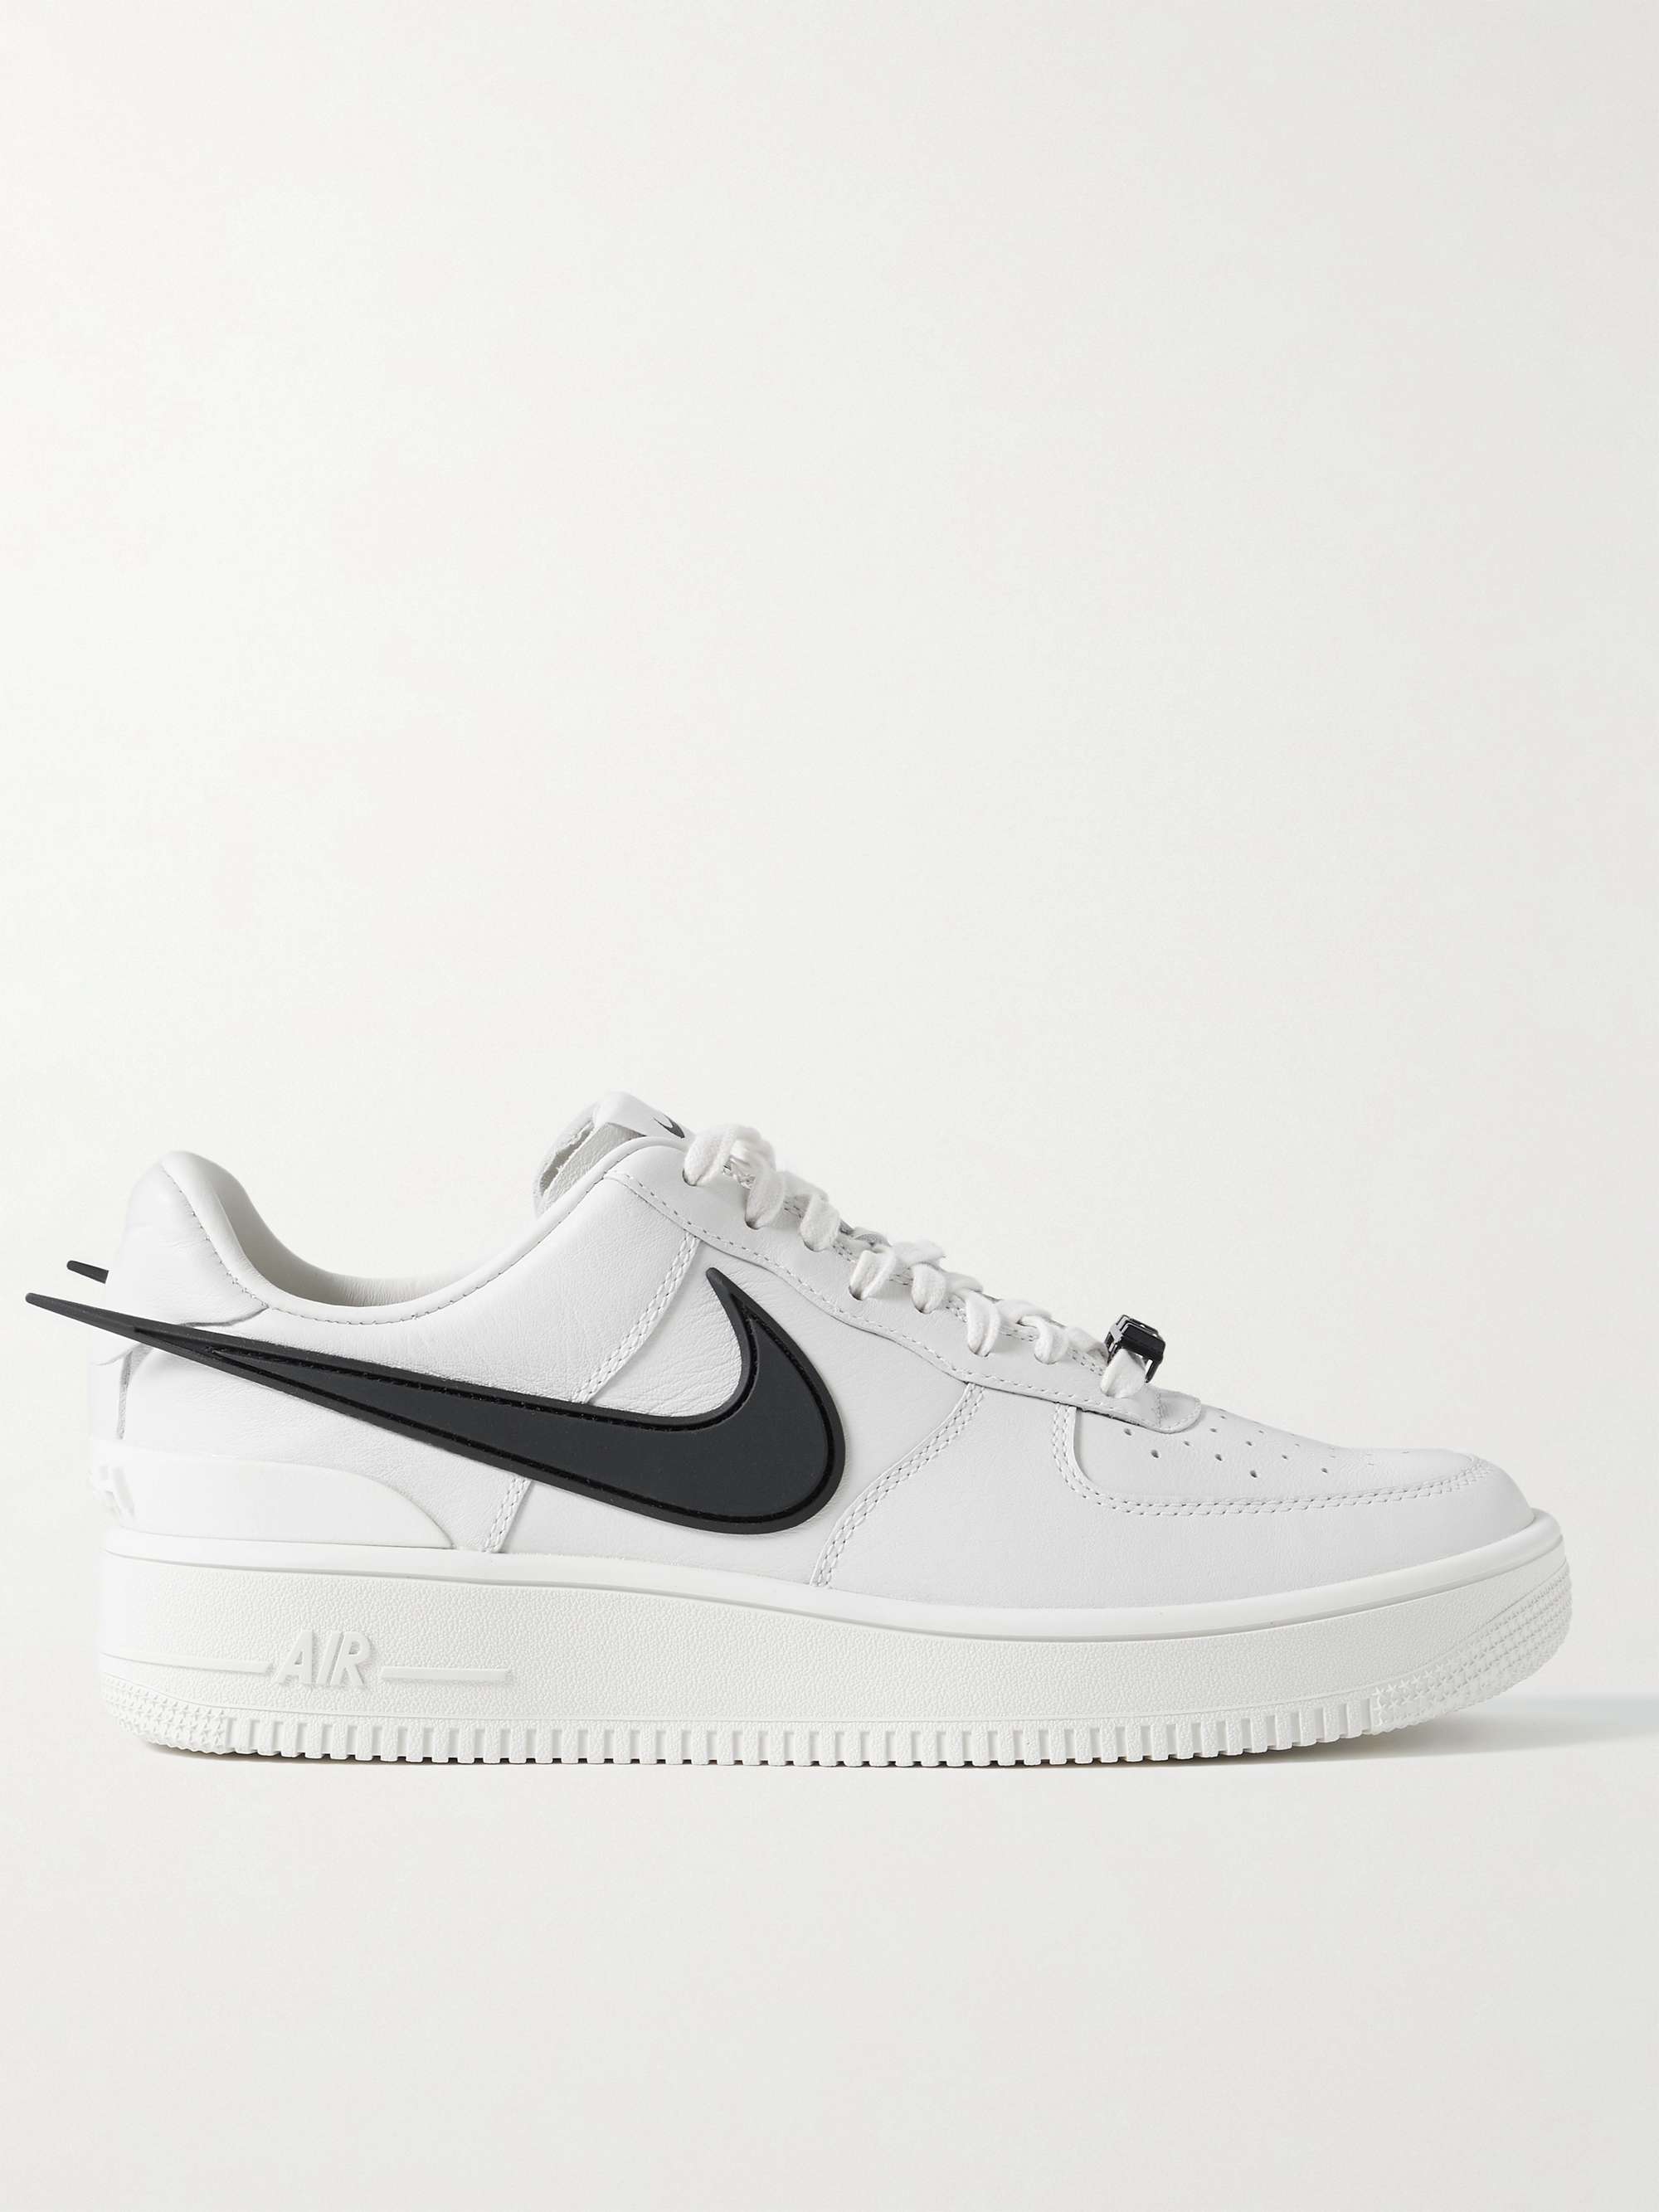 NIKE + AMBUSH Air Force 1 Rubber-Trimmed Leather Sneakers | MR PORTER